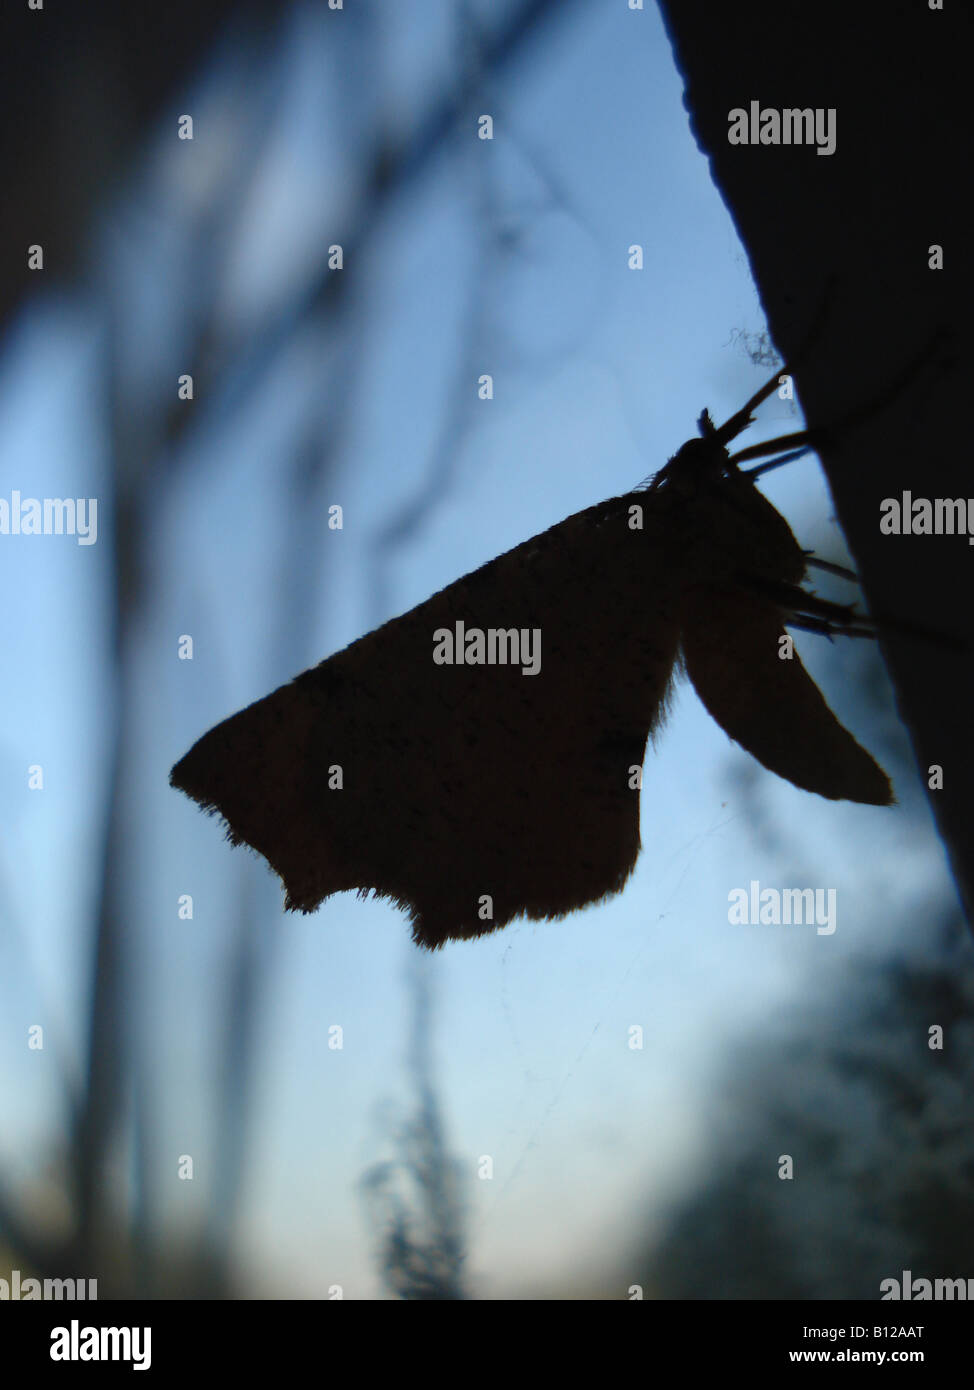 Silhouette of a moth perched on a vertical bar of a window, with sky and and textural surfaces in the background. Stock Photo